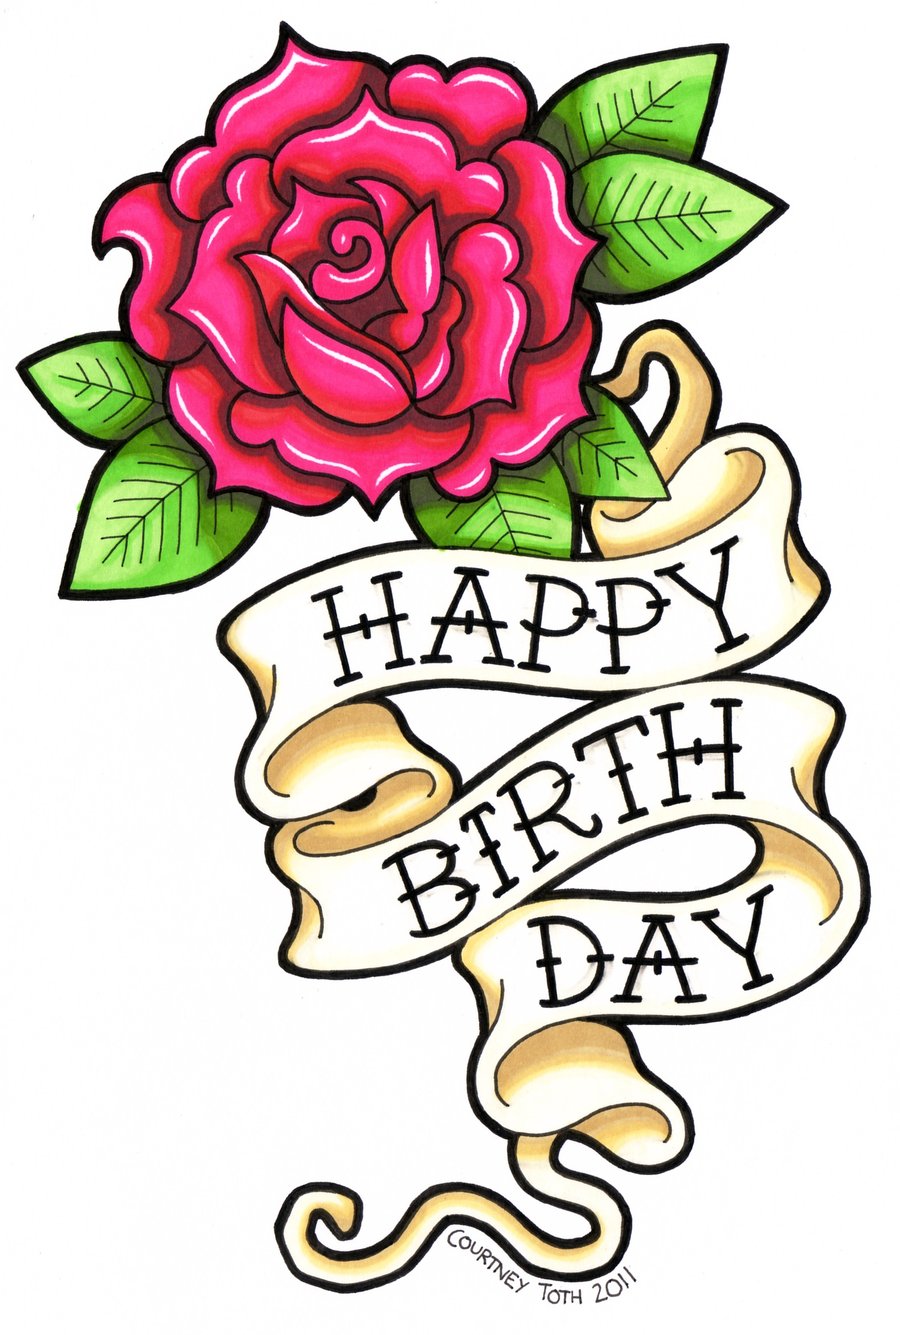 Clip Arts Related To : happy birthday to draw. view all Birthday Drawings)....